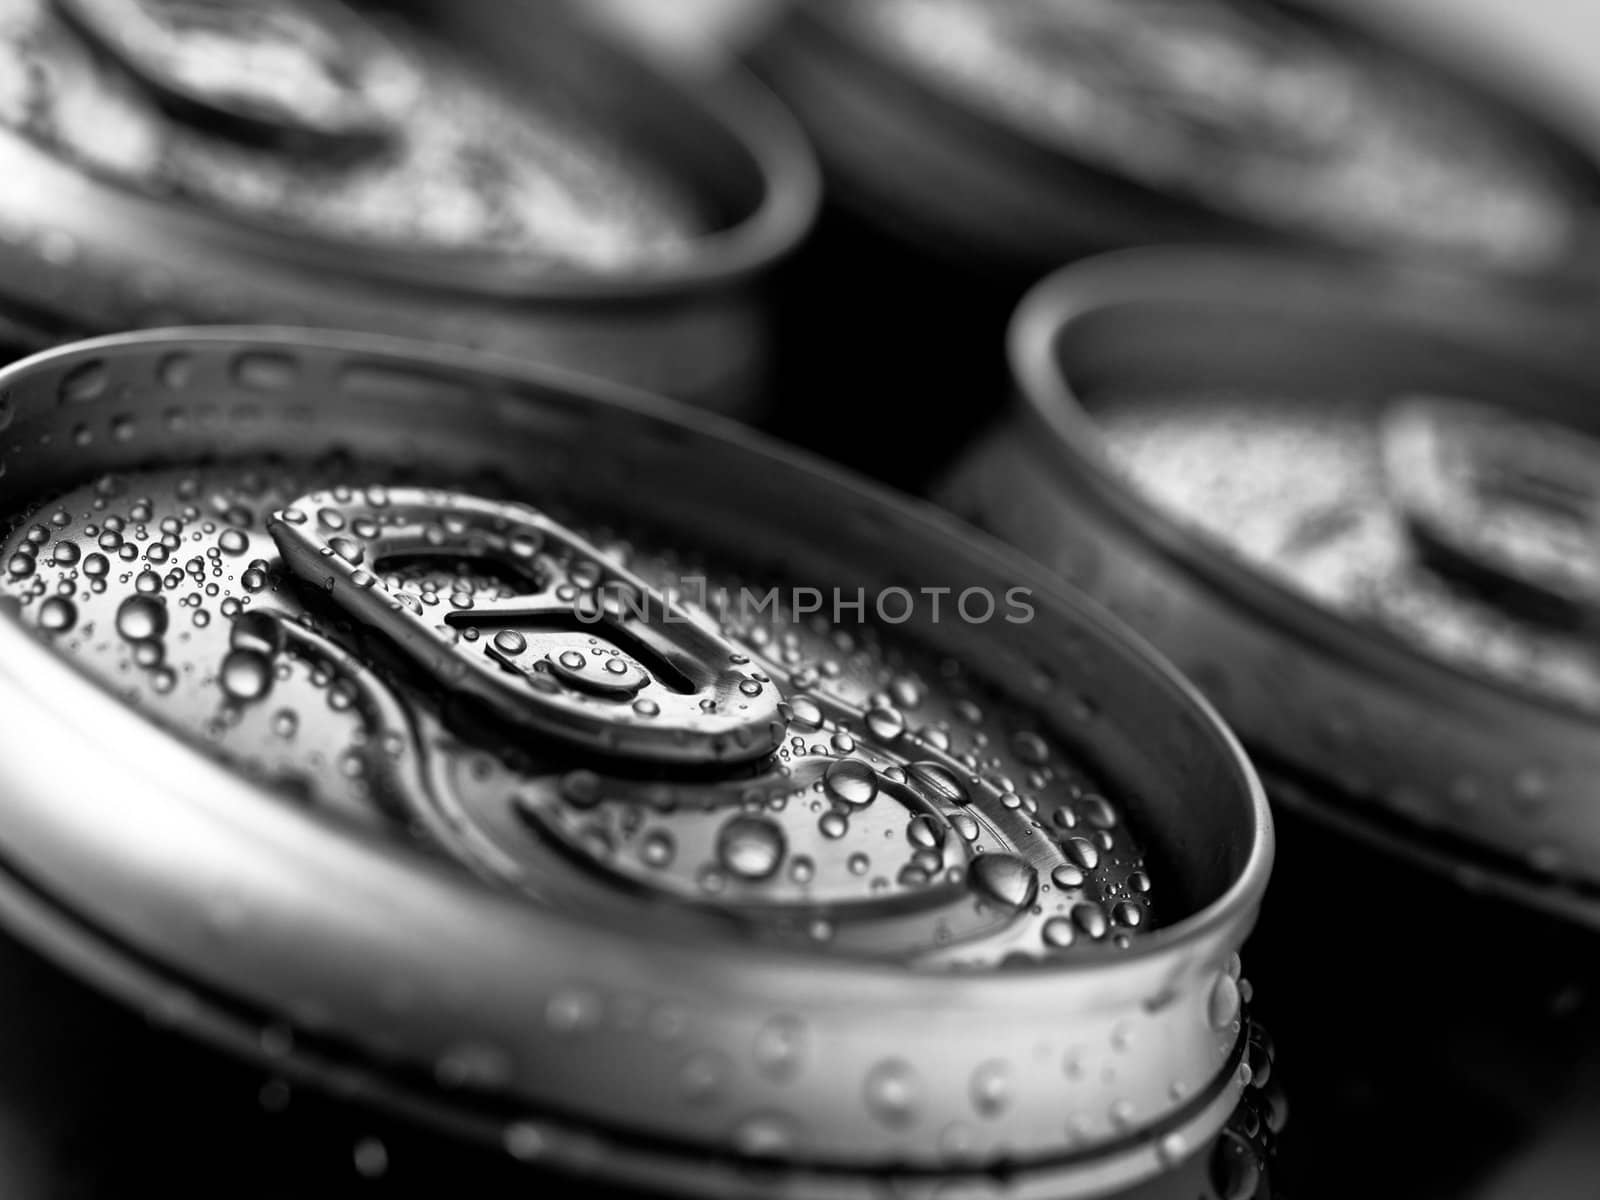 Top part of beer cans, close up view